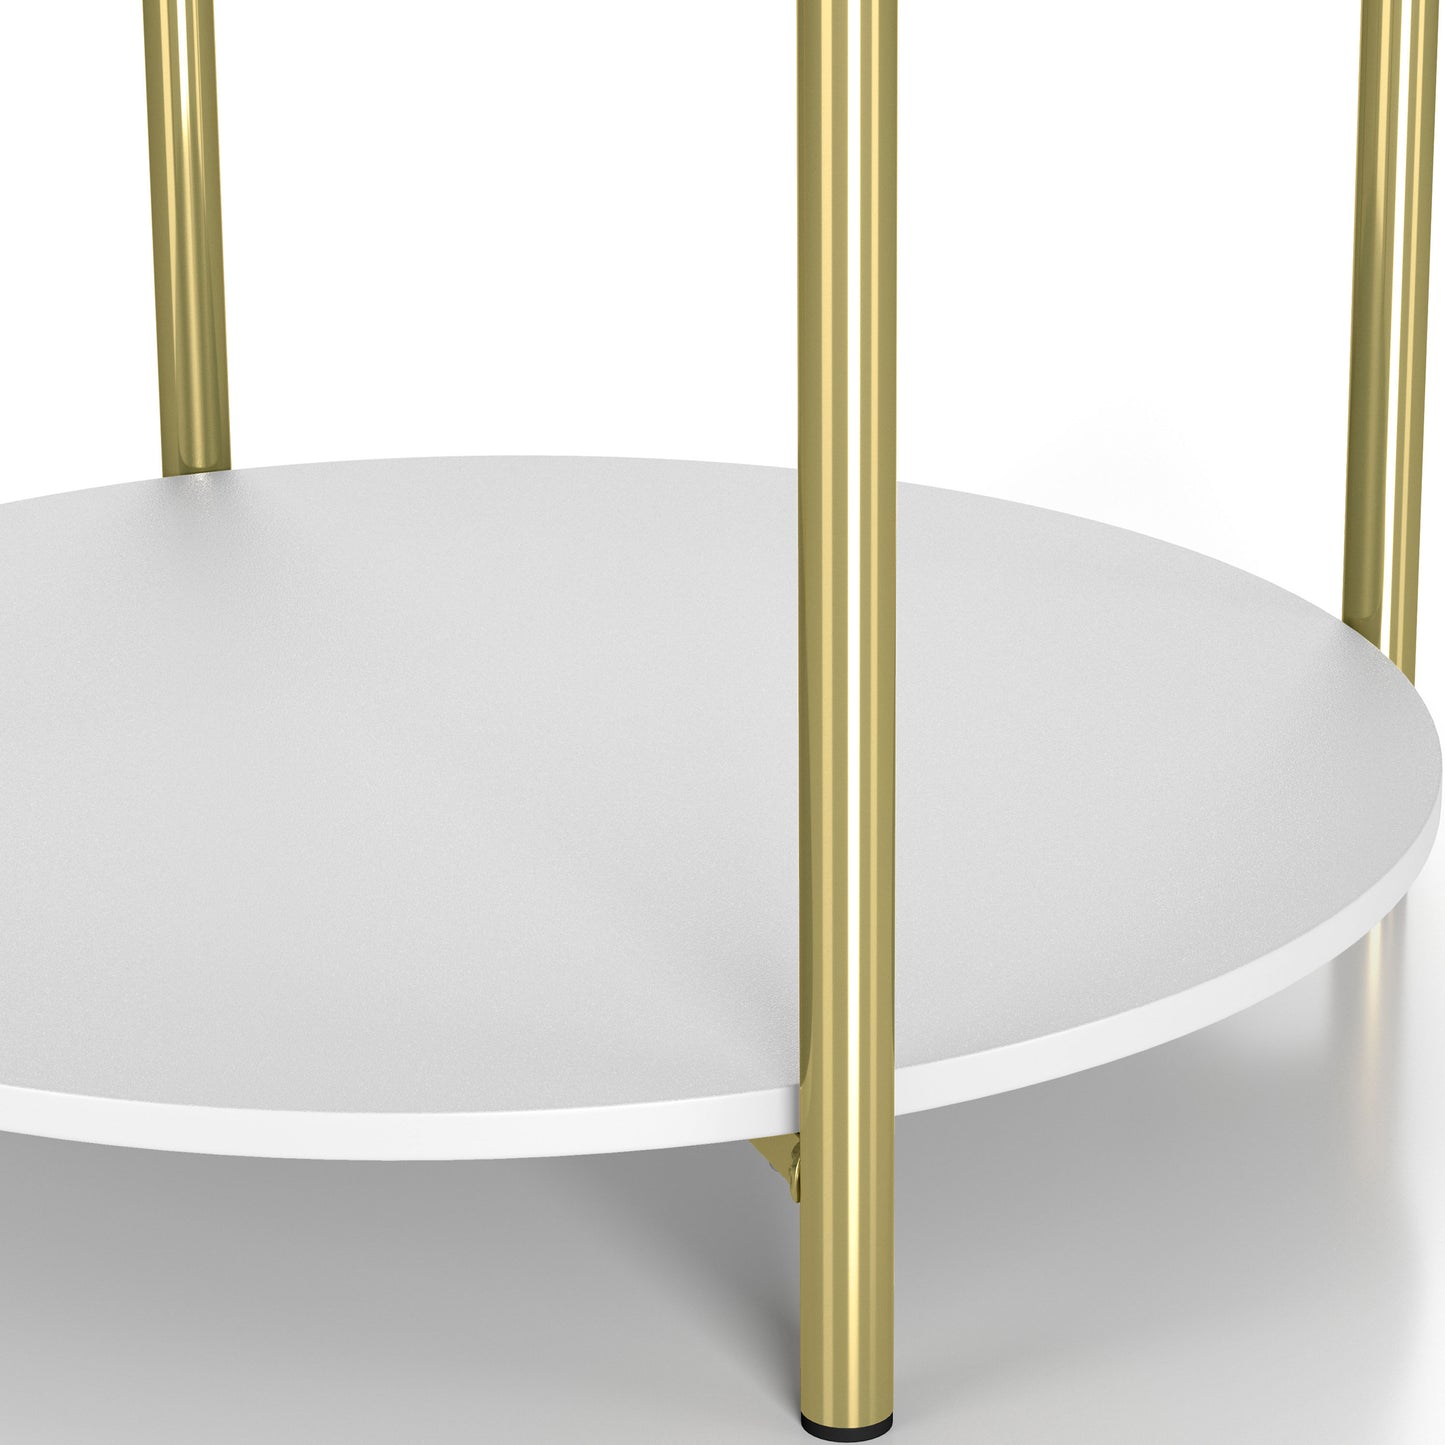 Angled close-up lower shelf/leg view of a modern white and gold round storage end table on a white background